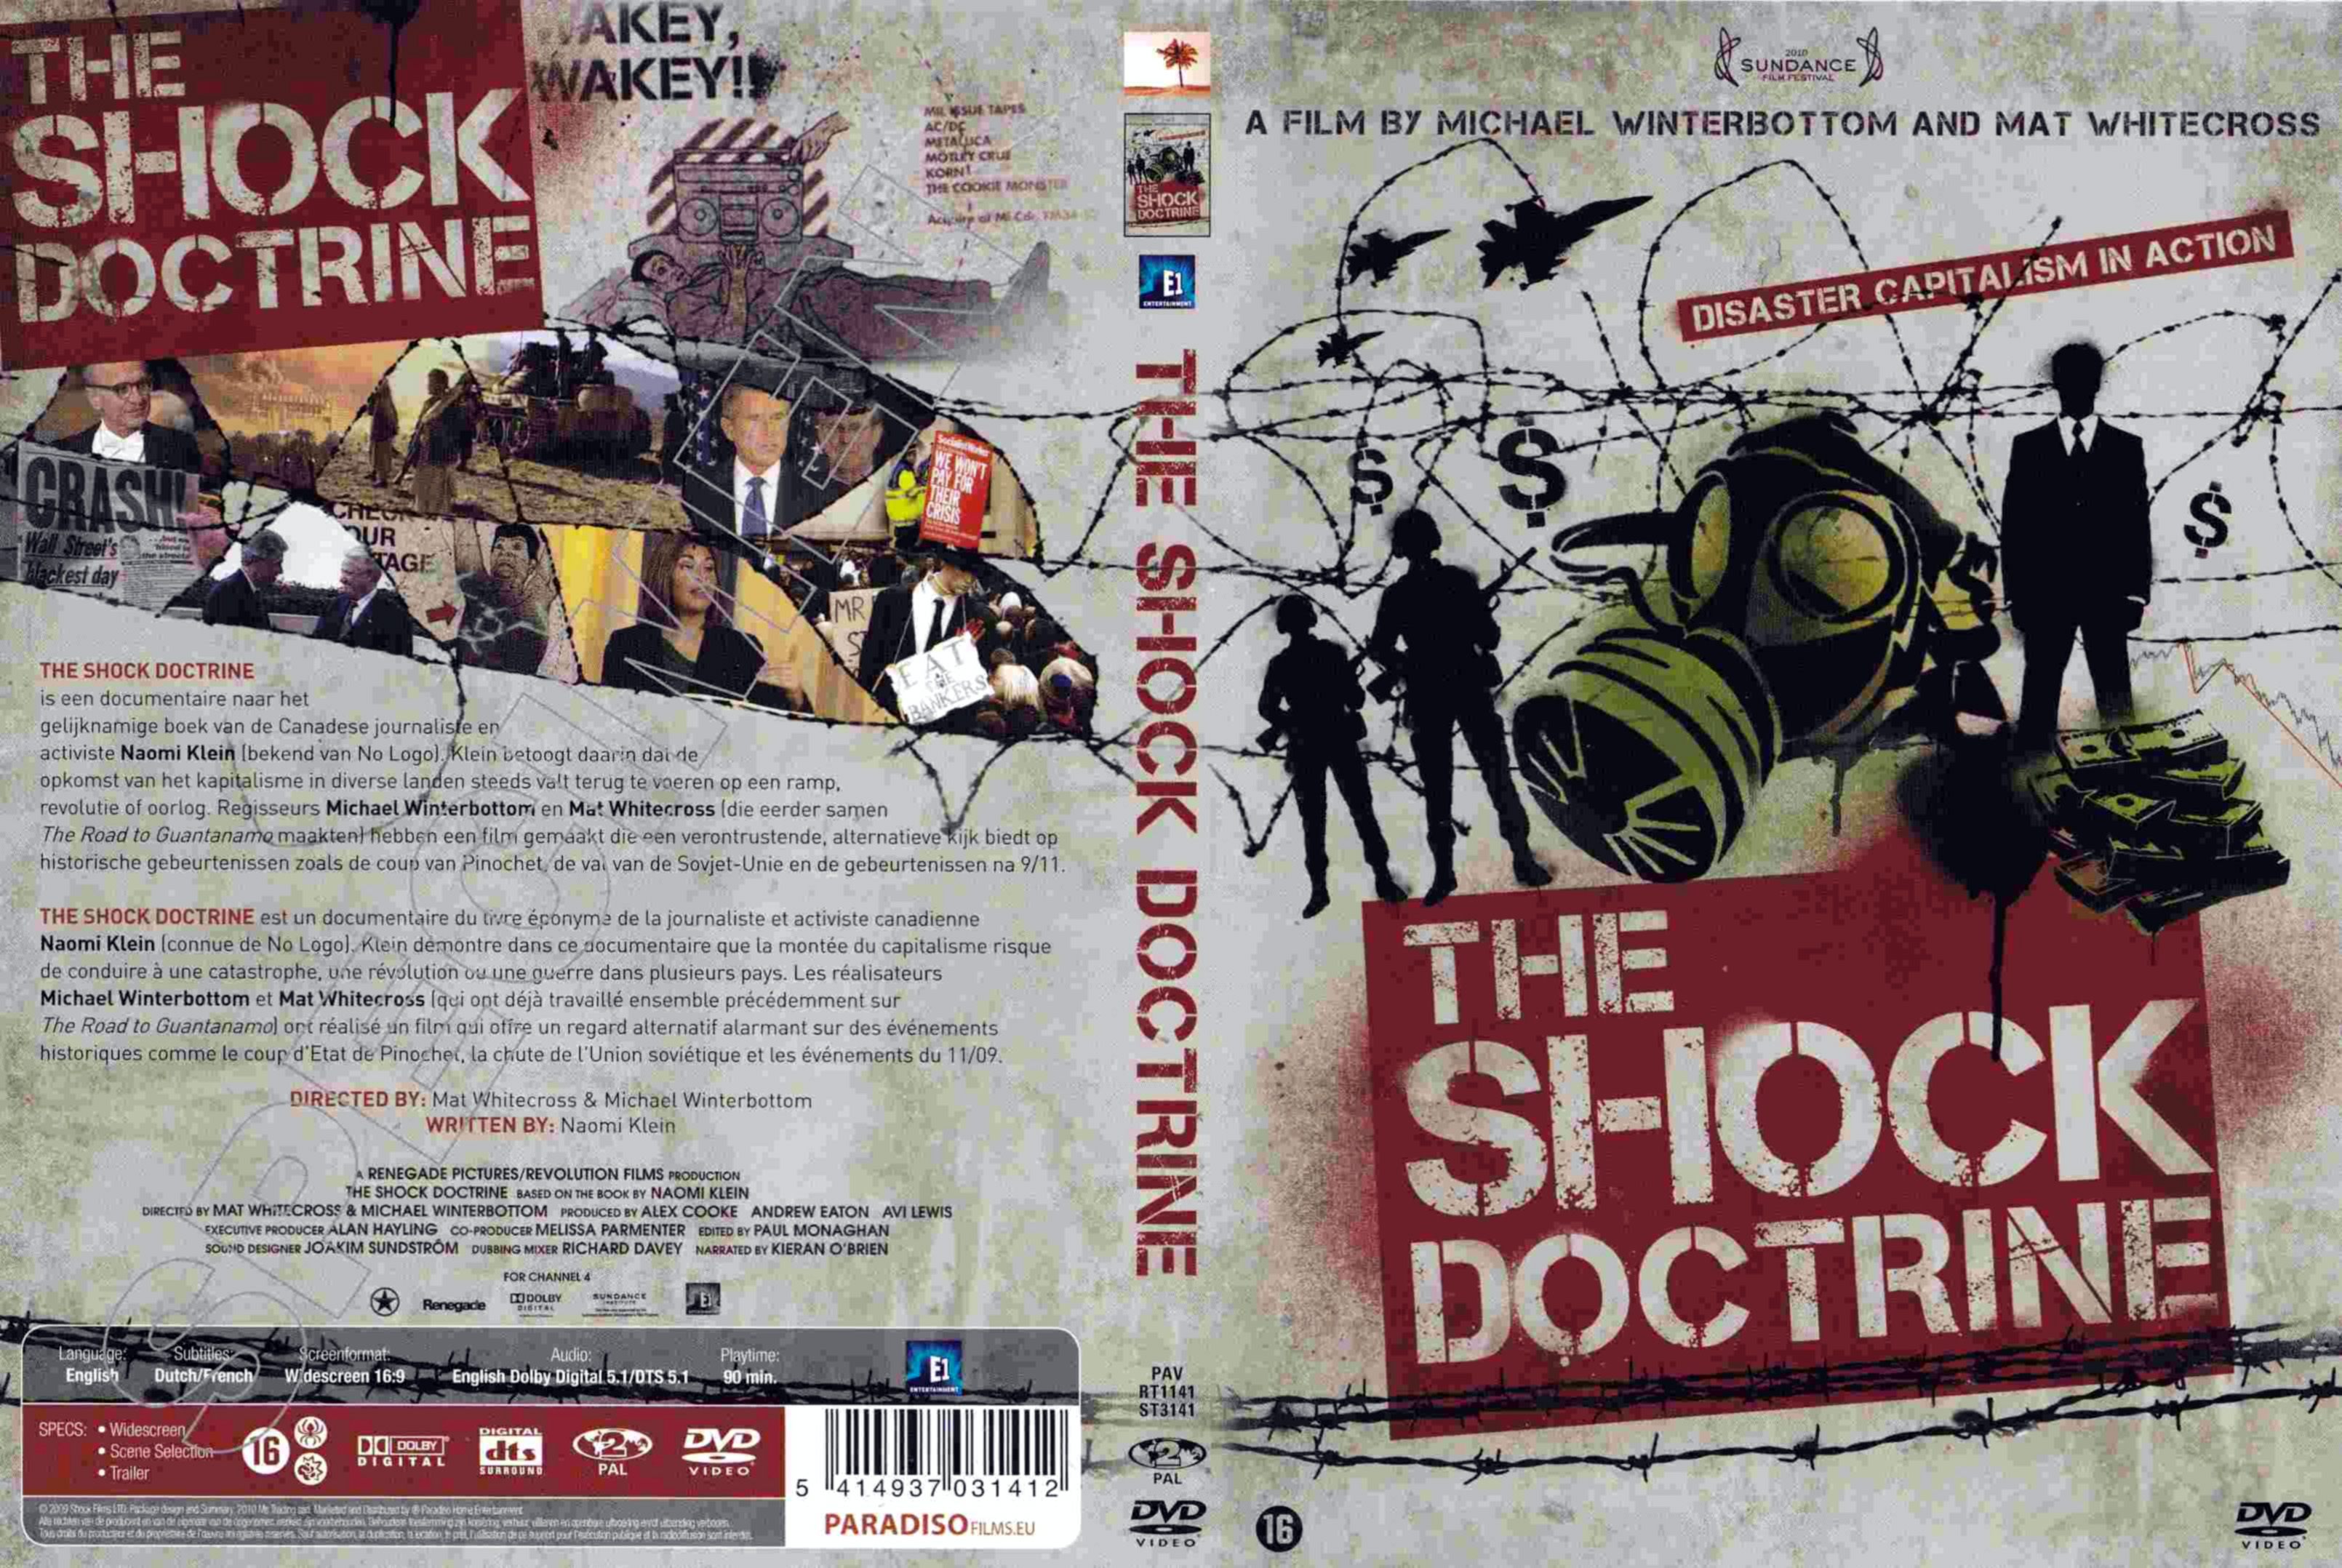 Jaquette DVD The Shock Doctrine